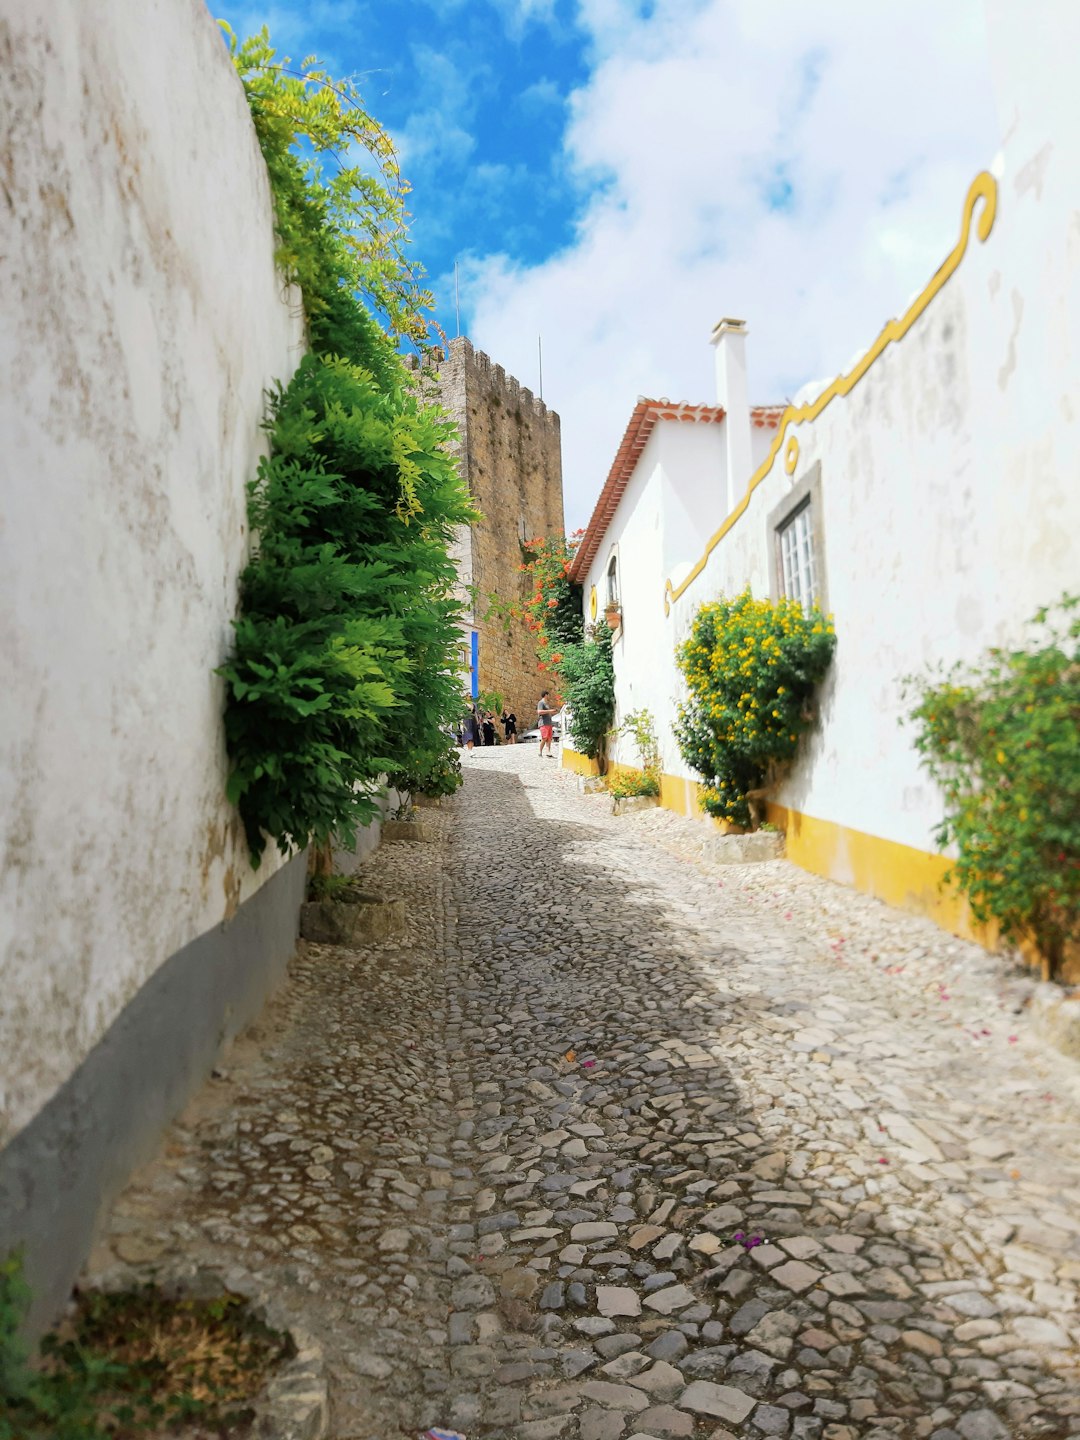 Travel Tips and Stories of Óbidos in Portugal